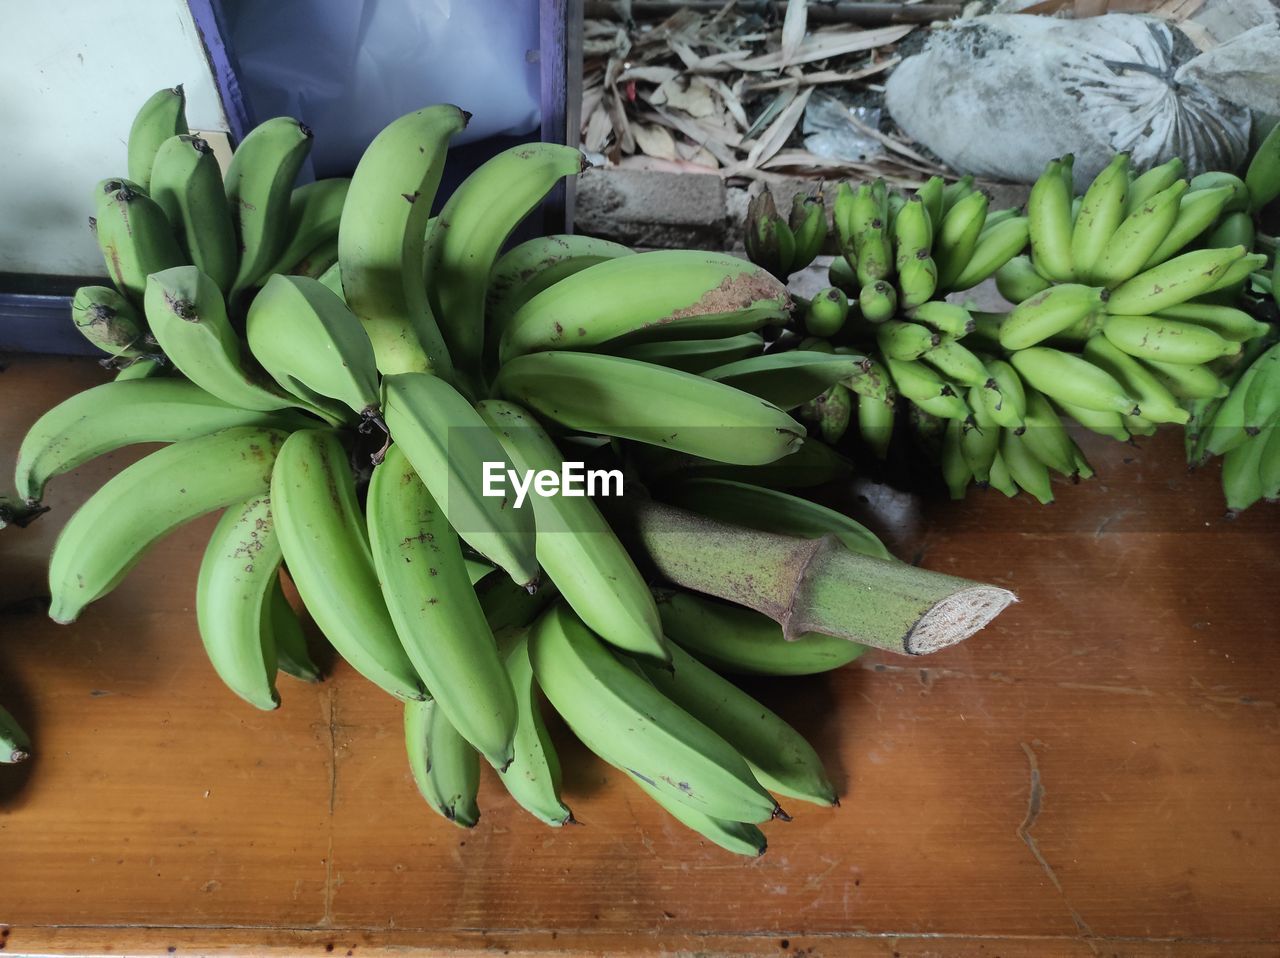 banana, food and drink, food, healthy eating, green, cooking plantain, wellbeing, freshness, flower, produce, bunch, plant, fruit, no people, vegetable, indoors, leaf, plant part, high angle view, raw food, still life, wood, retail, nature, large group of objects, table, organic